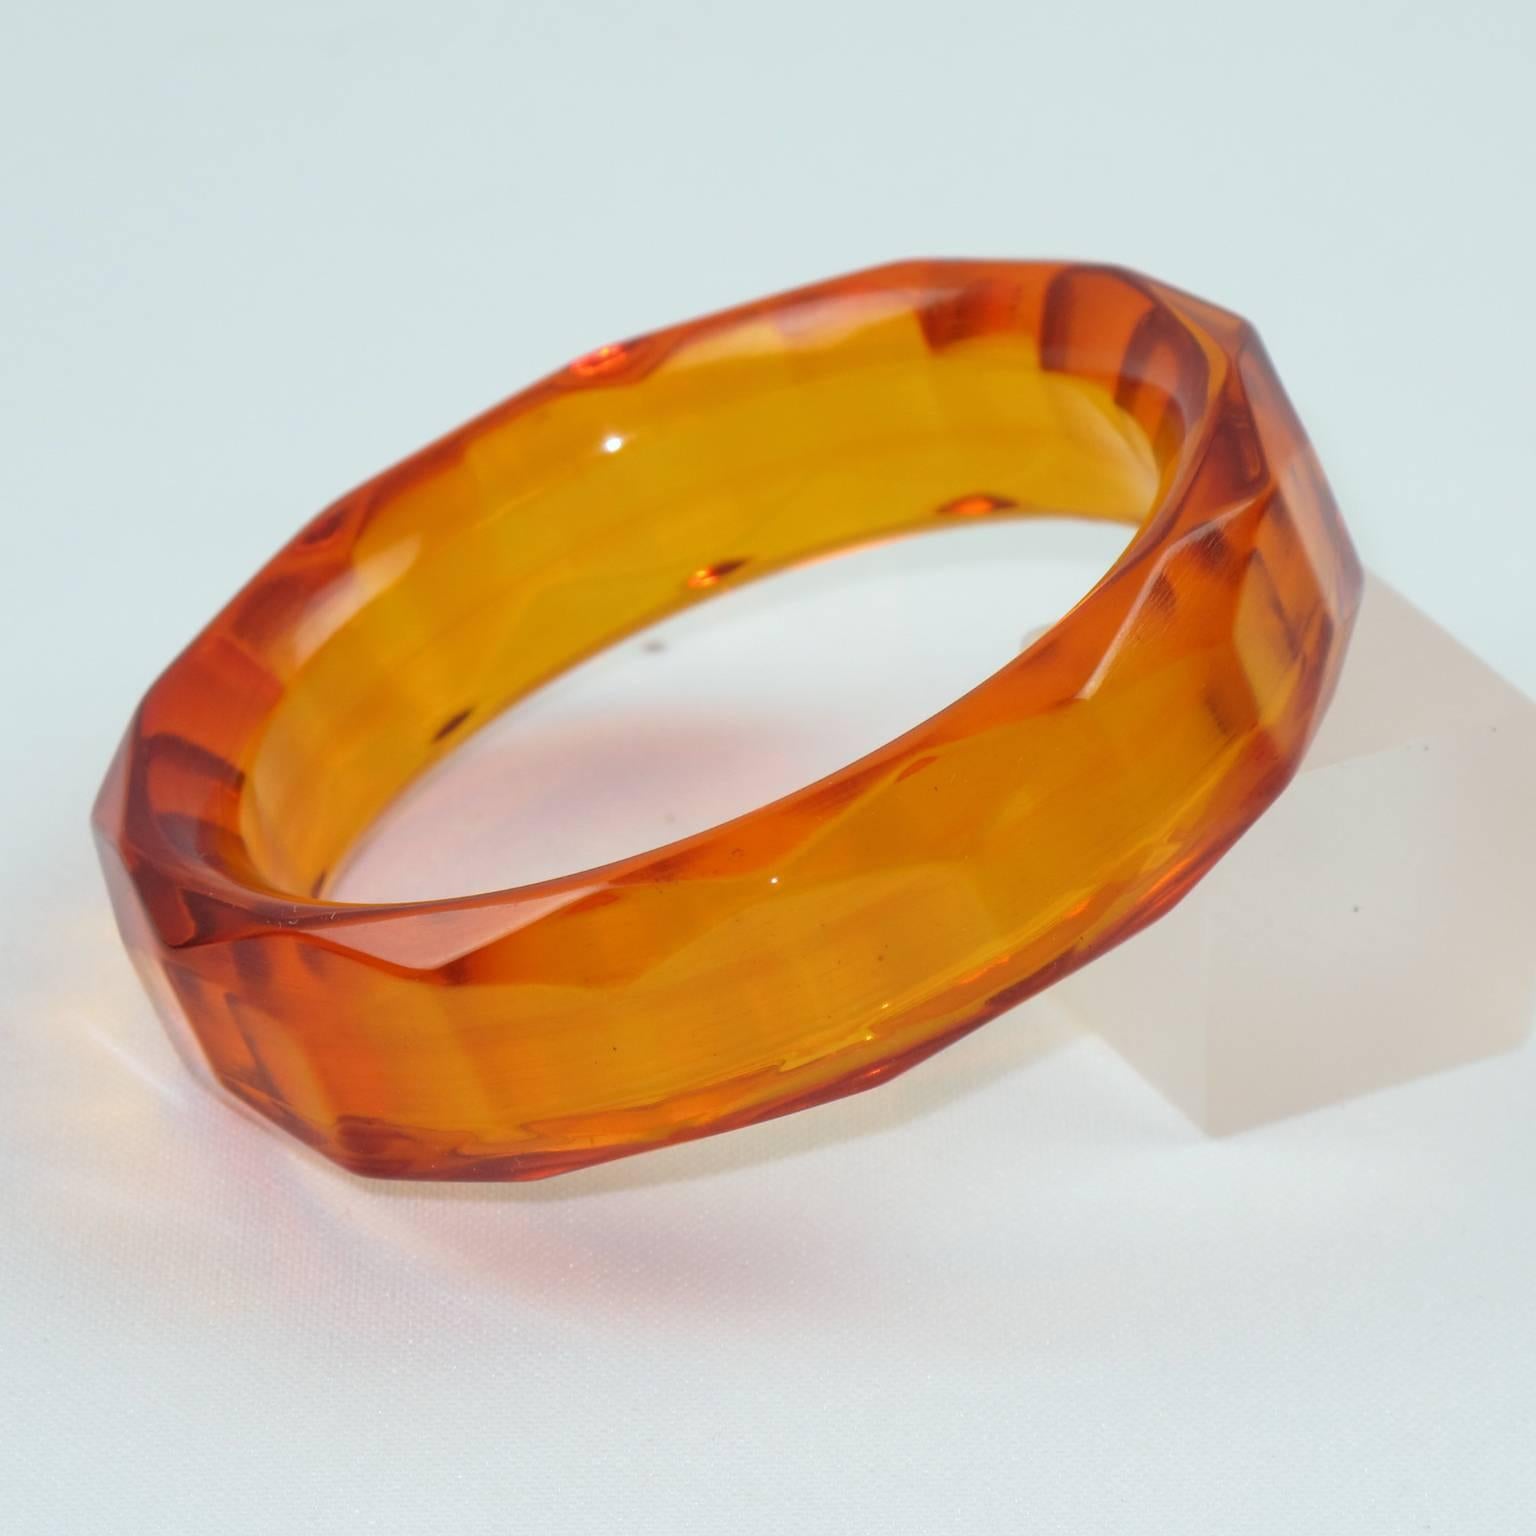 Stunning transparent orangeade Bakelite bracelet bangle. Chunky sliced shape with deeply faceted and carved design all around and extra thick wall. Intense orangeade tone, all transparent orange color with red overtone on edges. This Prystal quality